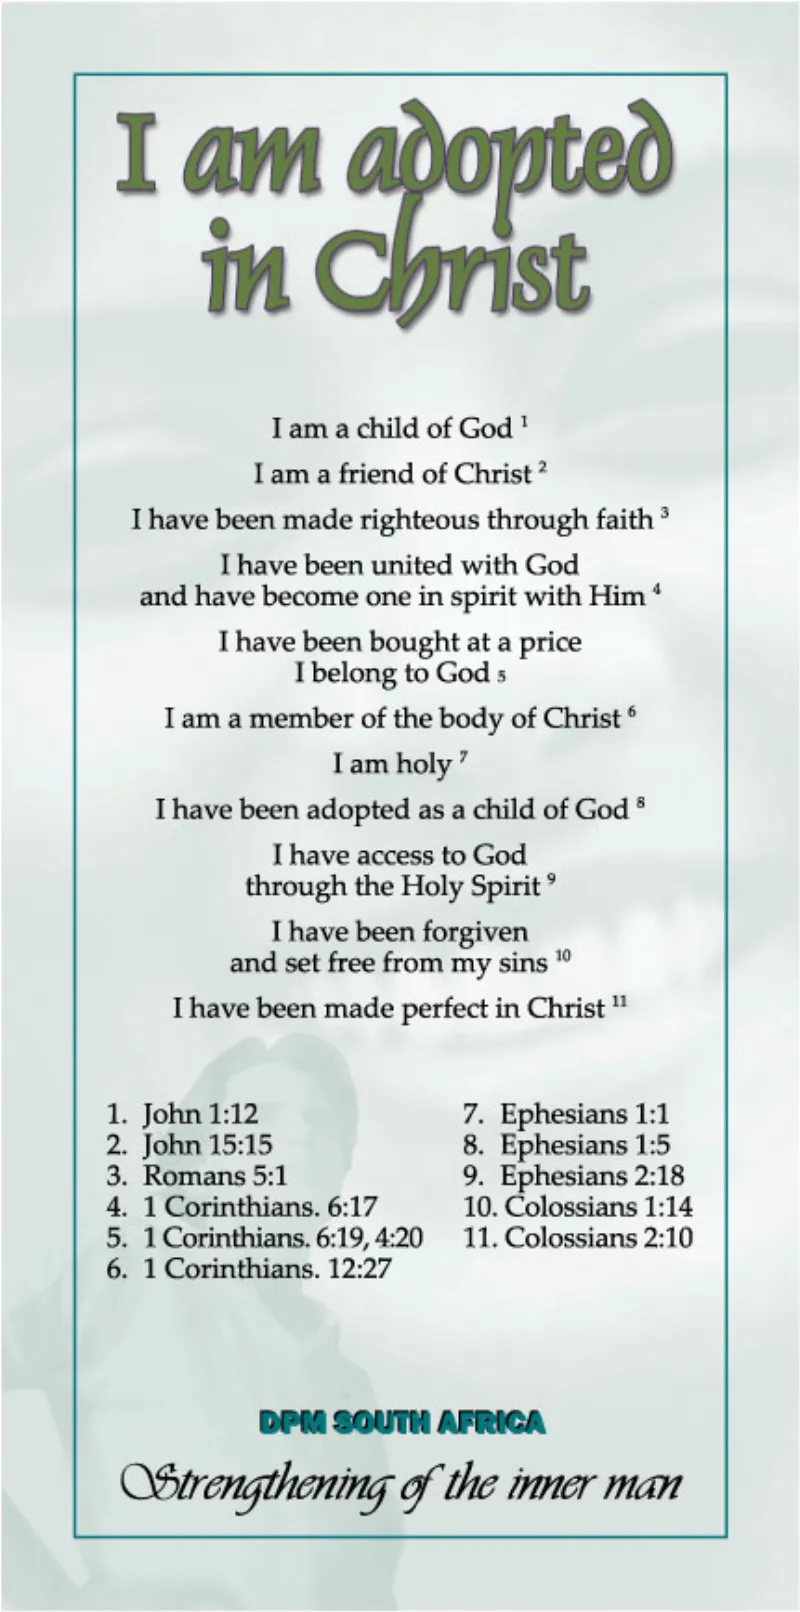 Proclamation - I am adopted in Christ